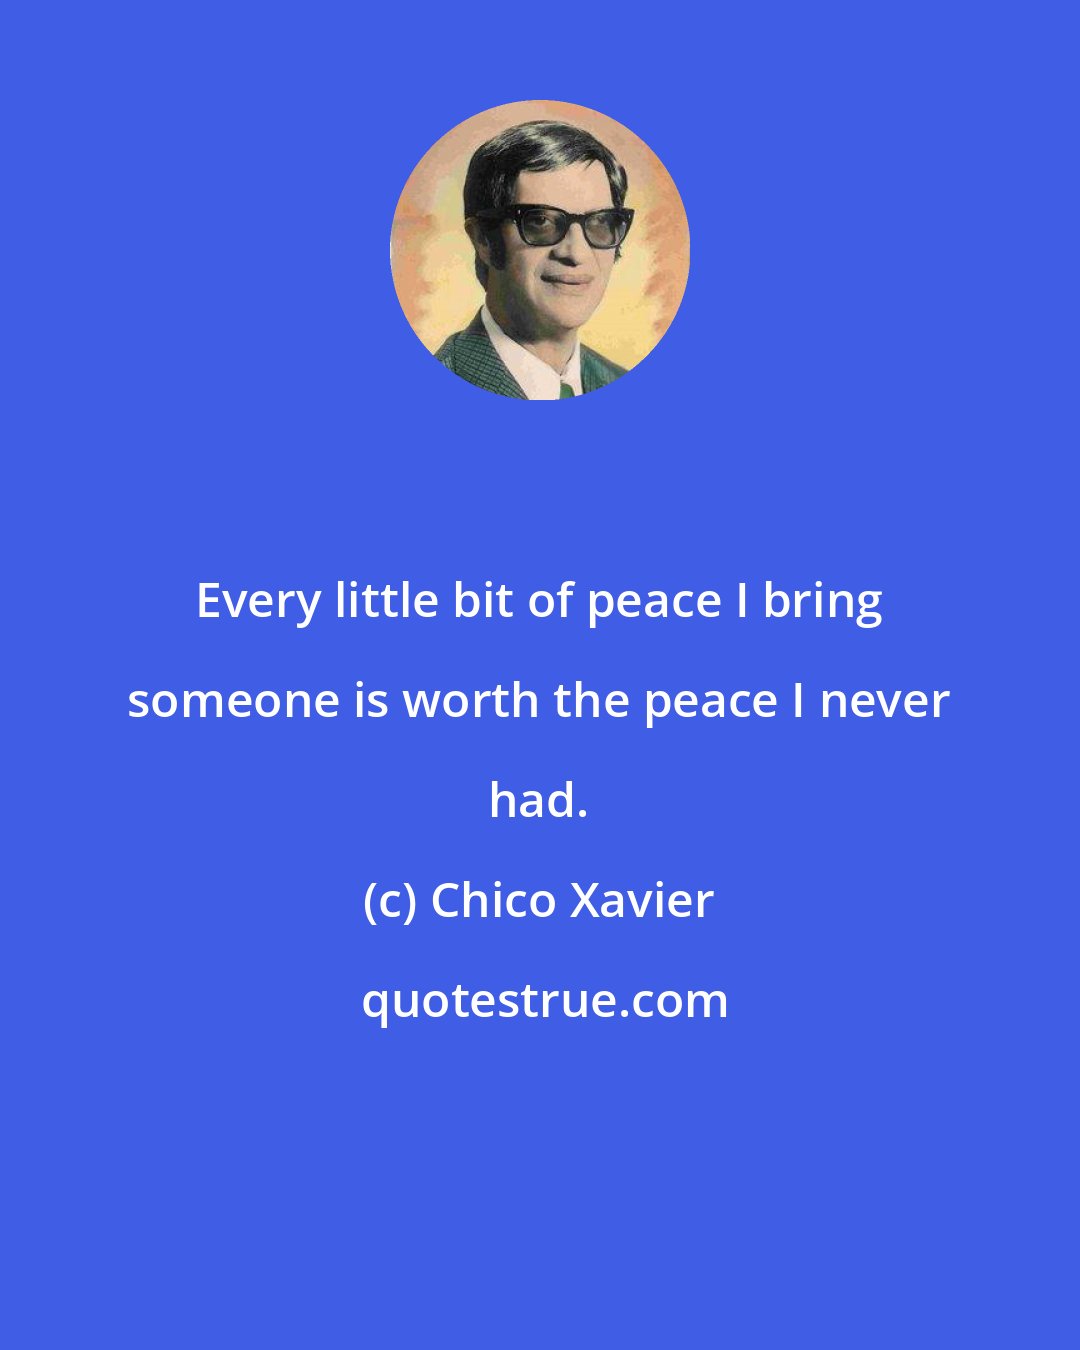 Chico Xavier: Every little bit of peace I bring someone is worth the peace I never had.